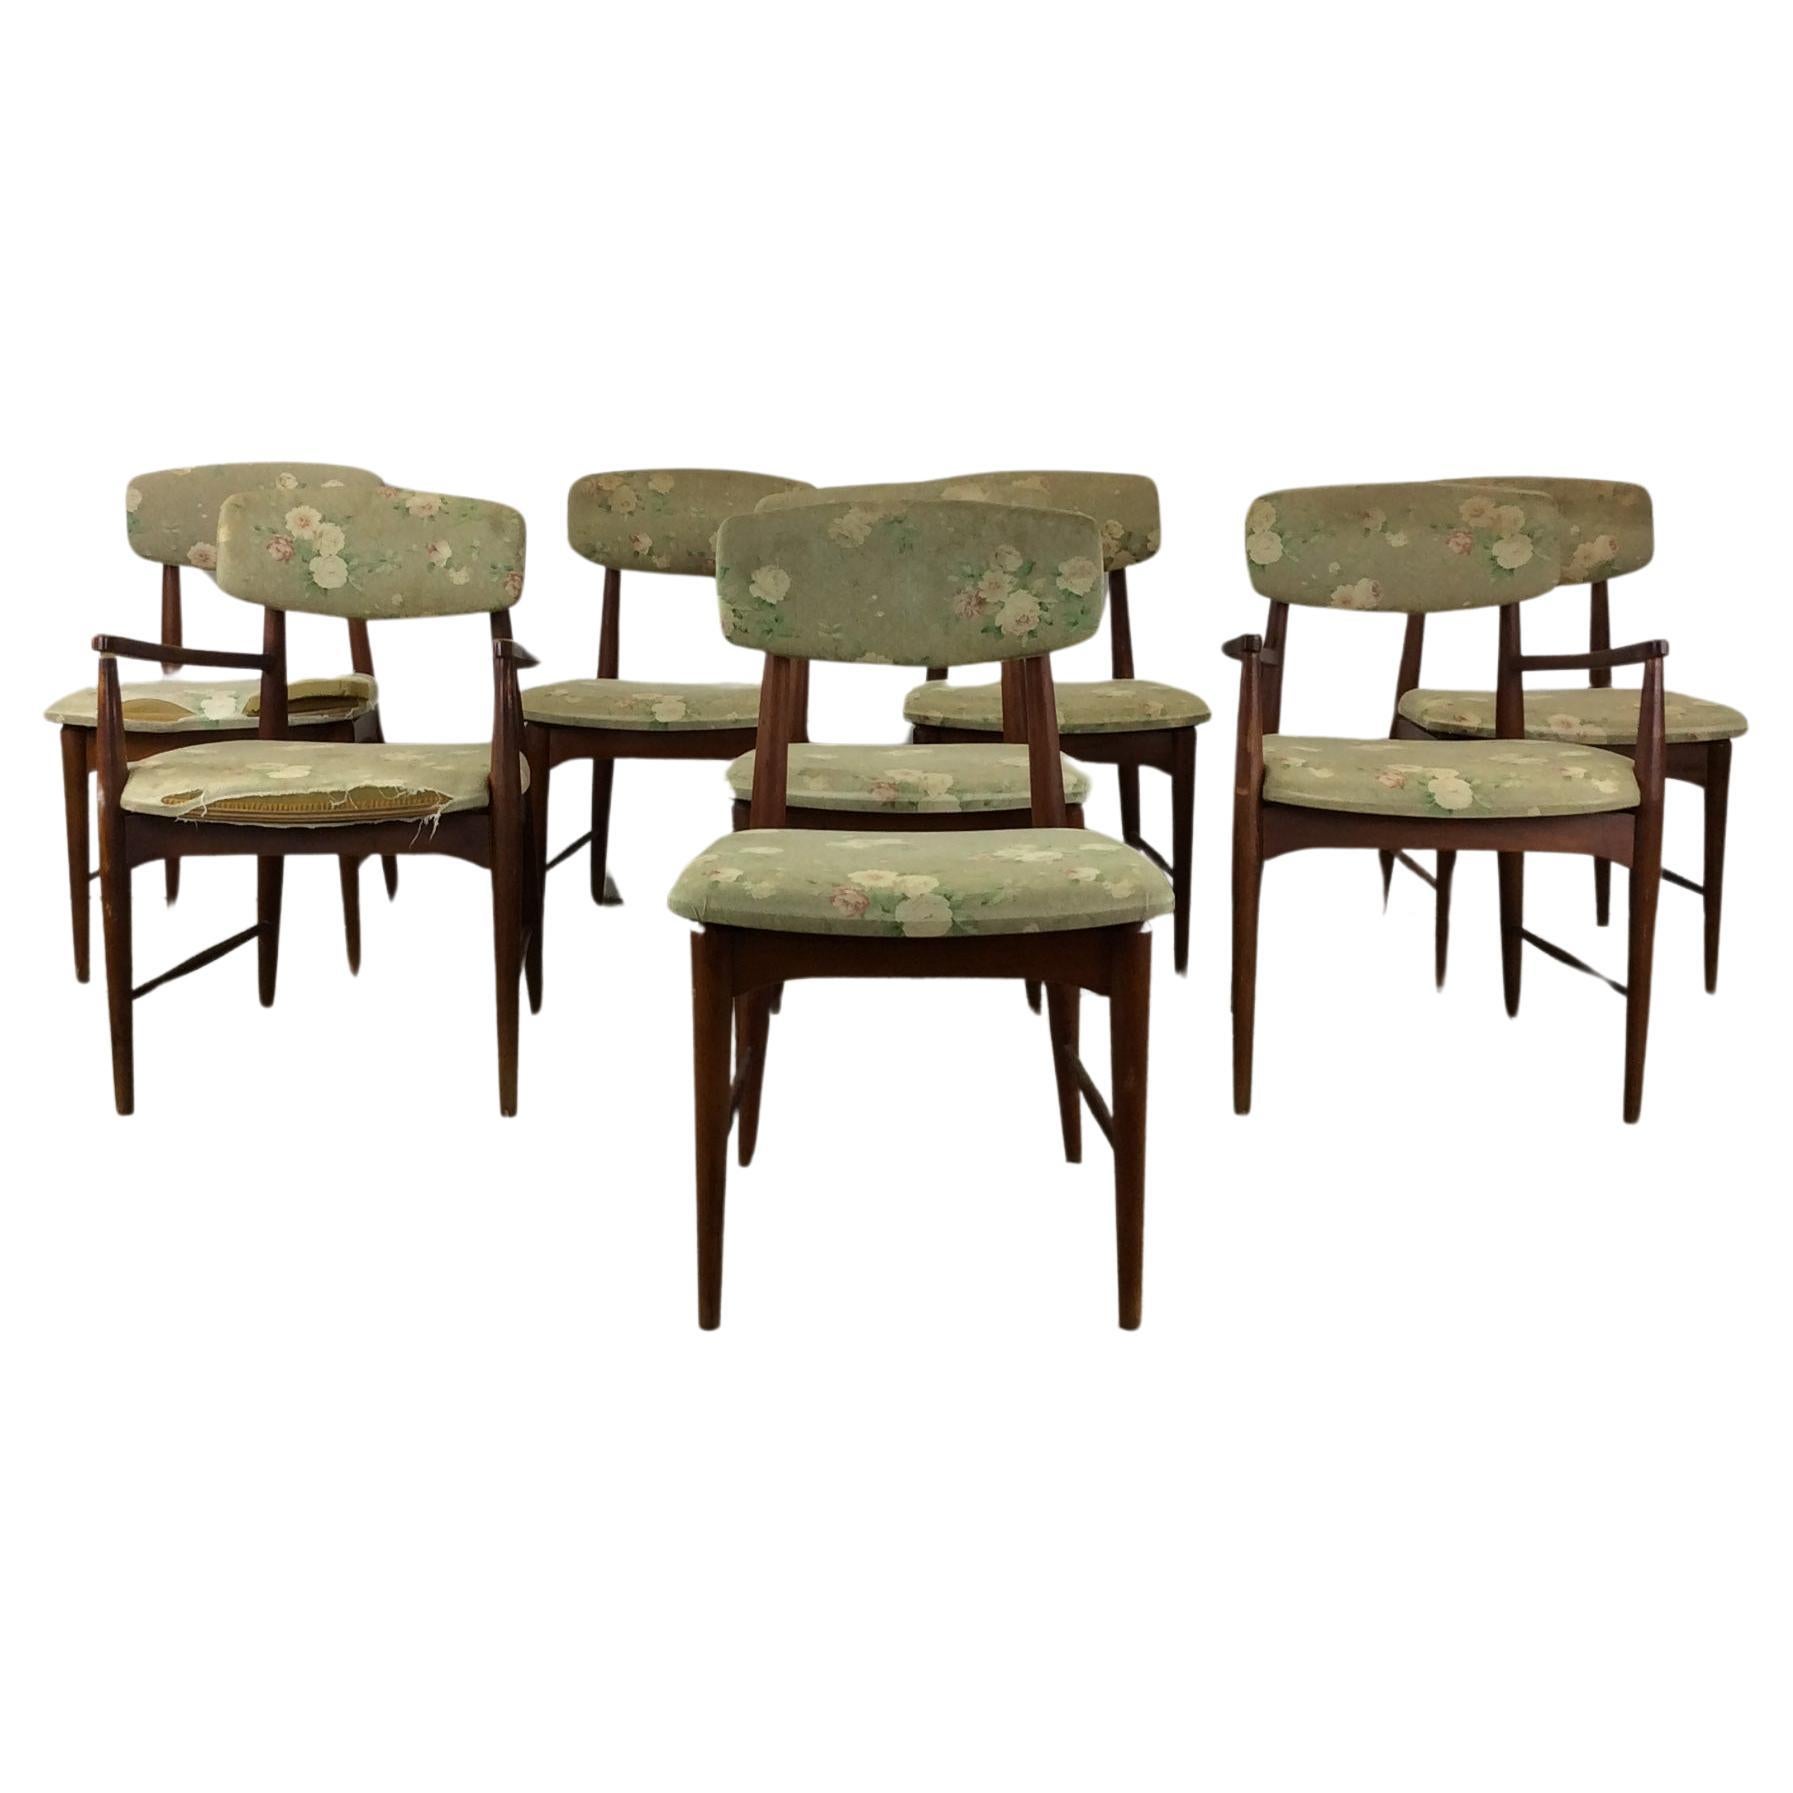 Set of 8 Mid Century Modern Dining Room Chairs with Vintage Upholstery For Sale